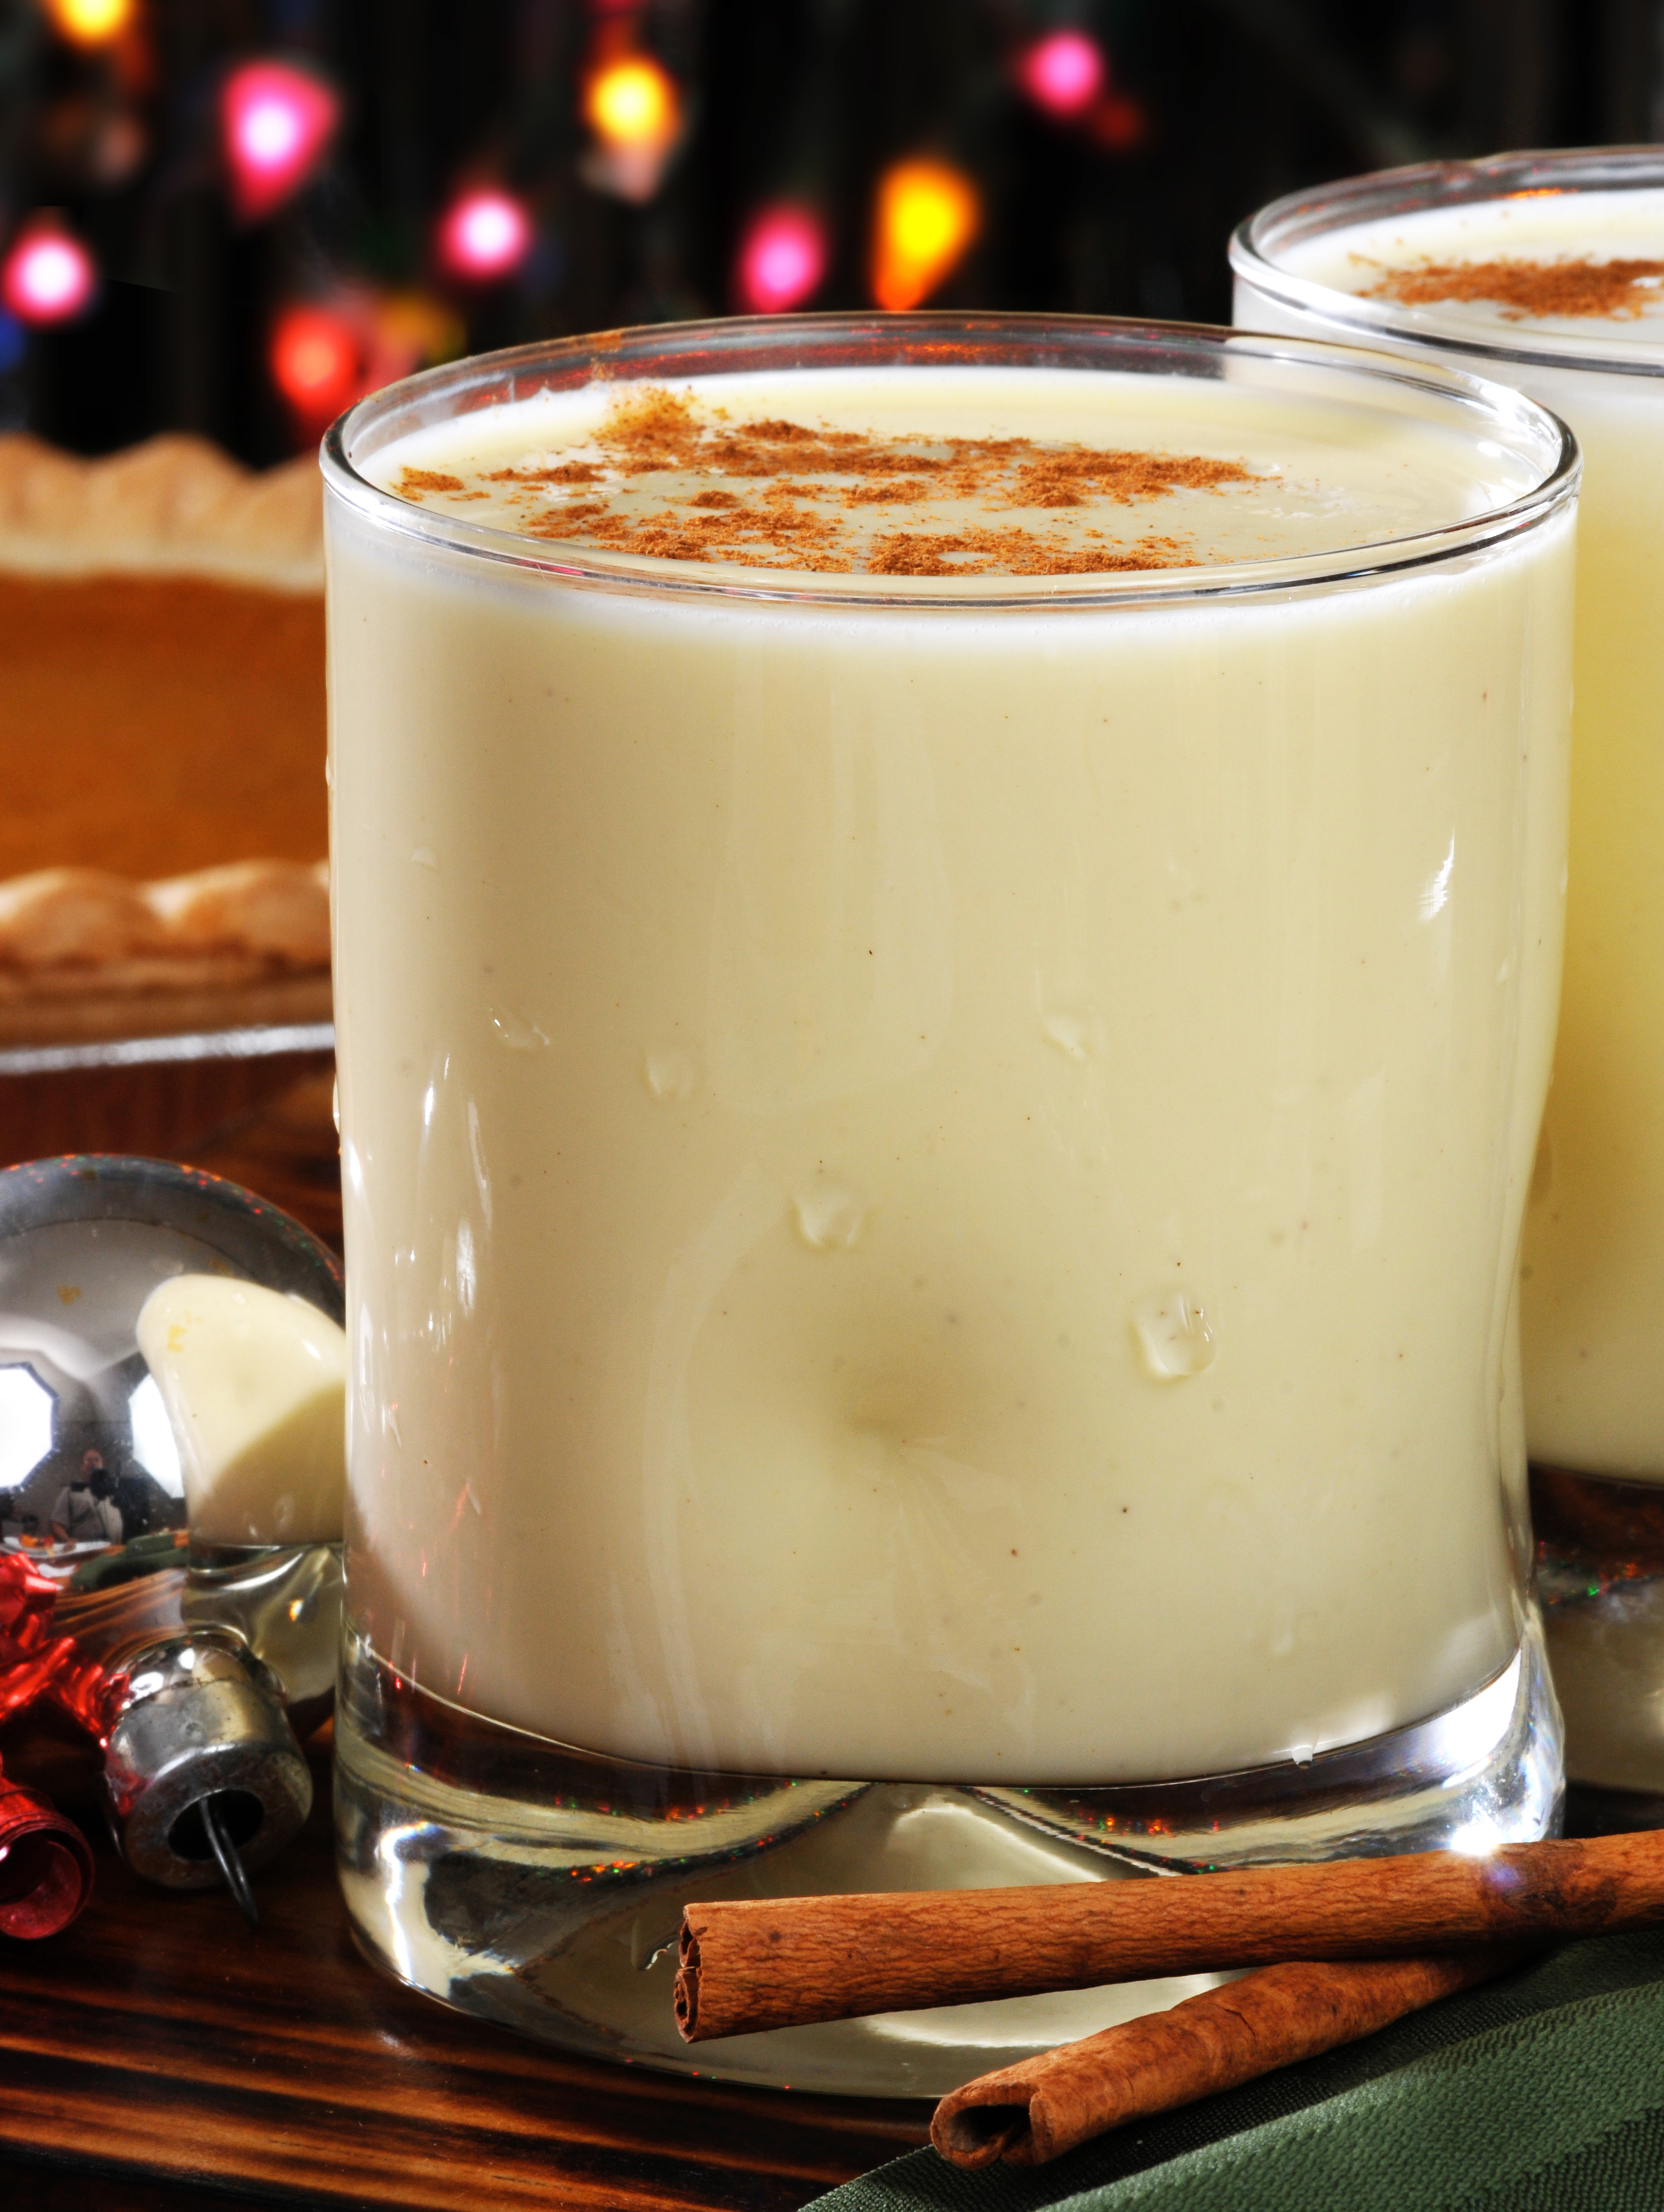 What is Eggnog Made Of?